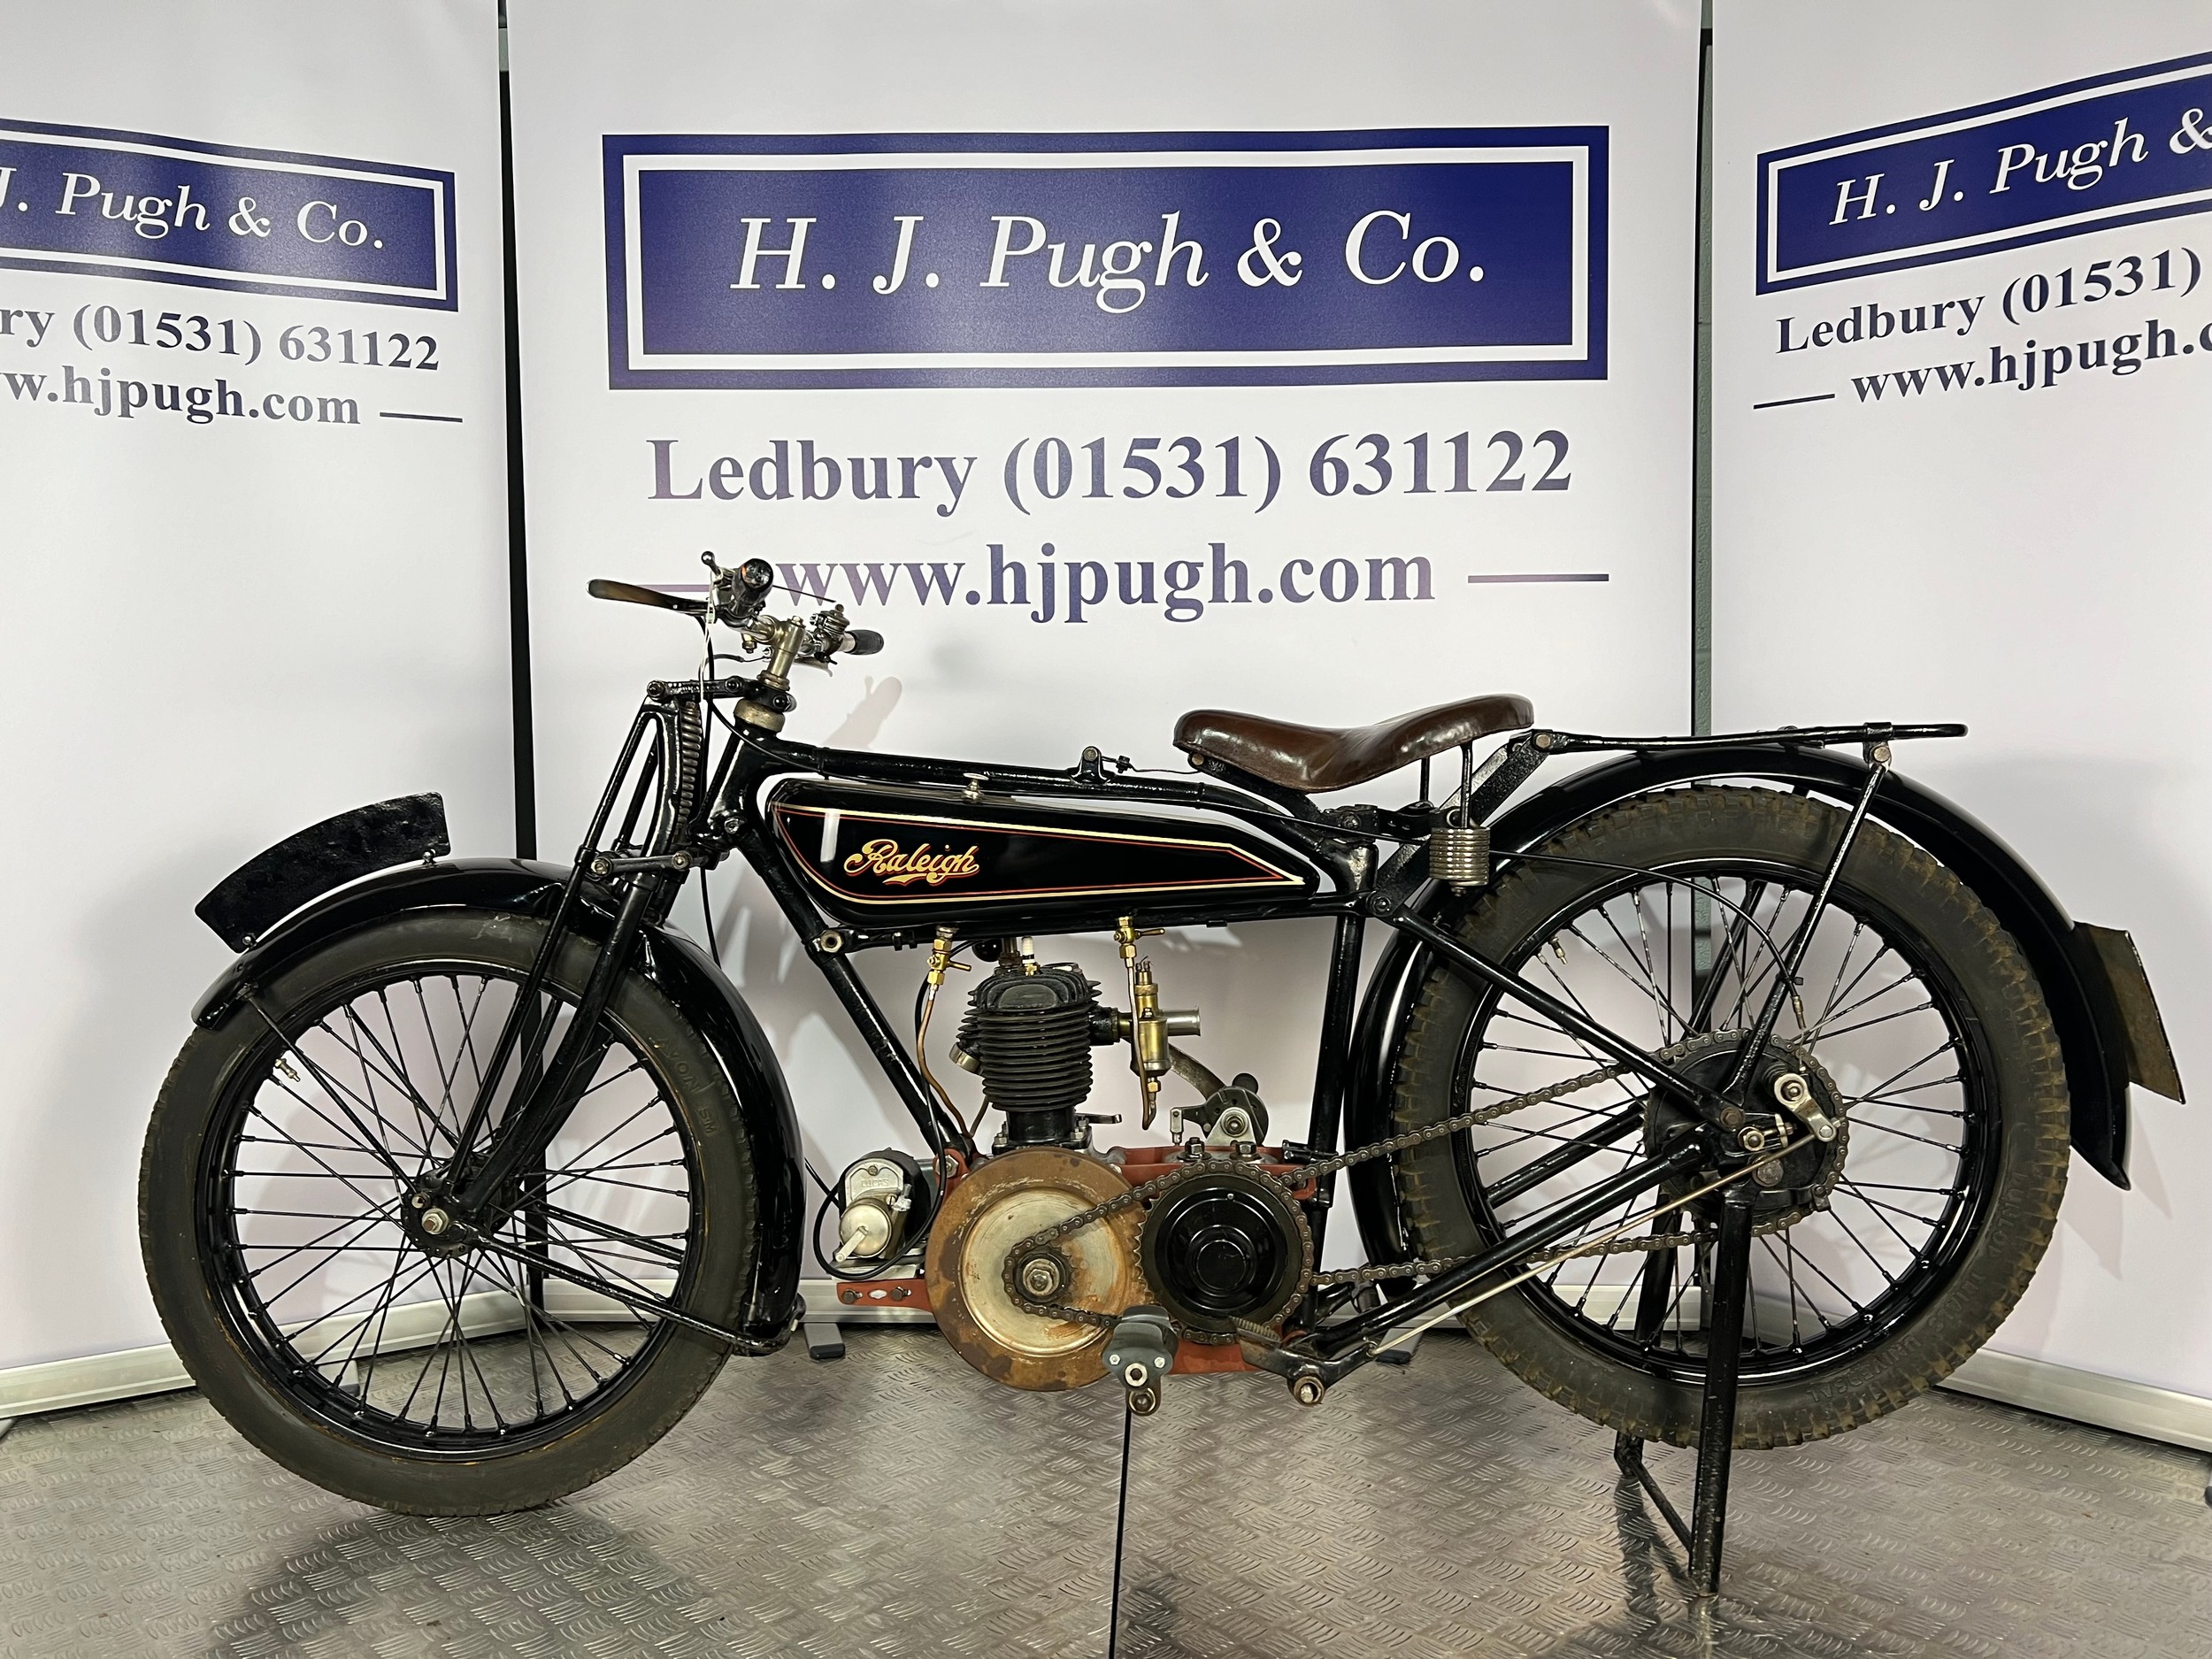 Raleigh Model 15 2¼HP motorcycle. 1924. 250cc. Frame No. 5341 Engine No. M1651 Comes with box of - Image 8 of 8